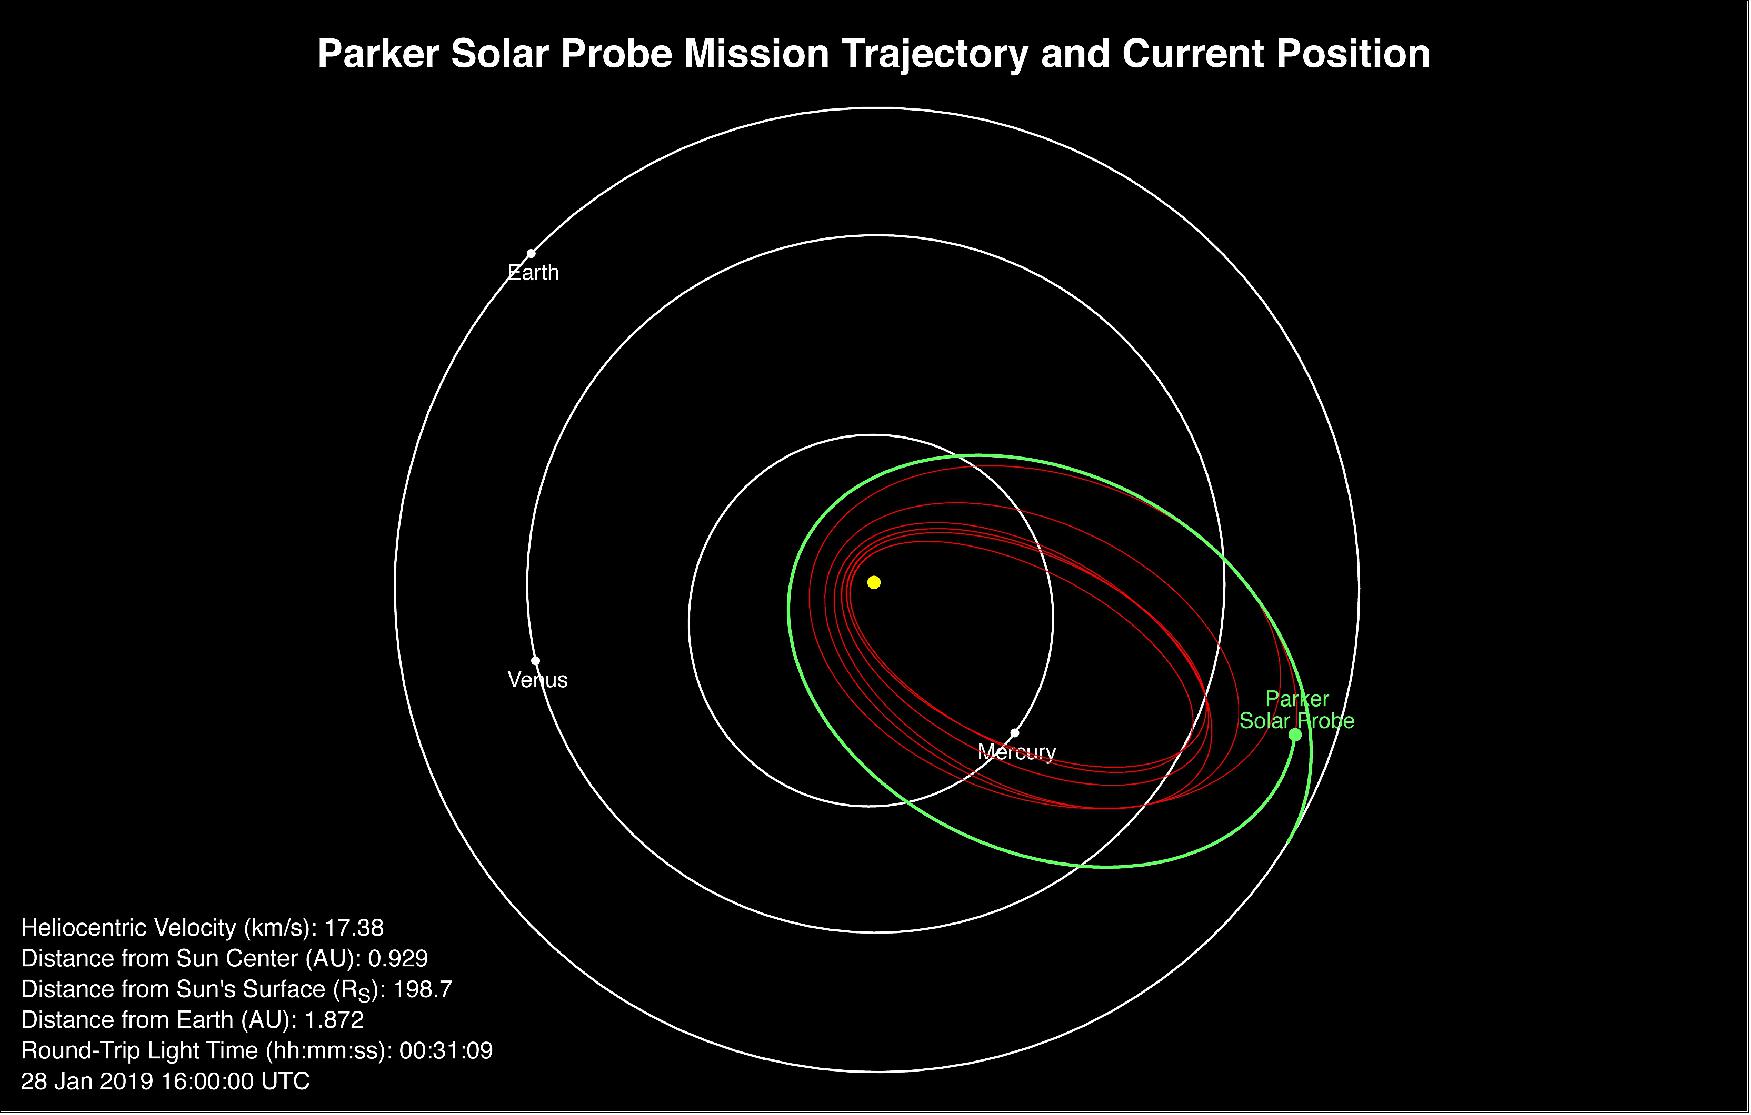 Figure 9: Parker Solar Probe’s position, speed and round-trip light time as of Jan. 28, 2019 (image credit: NASA, JHU/APL, Track the spacecraft online)